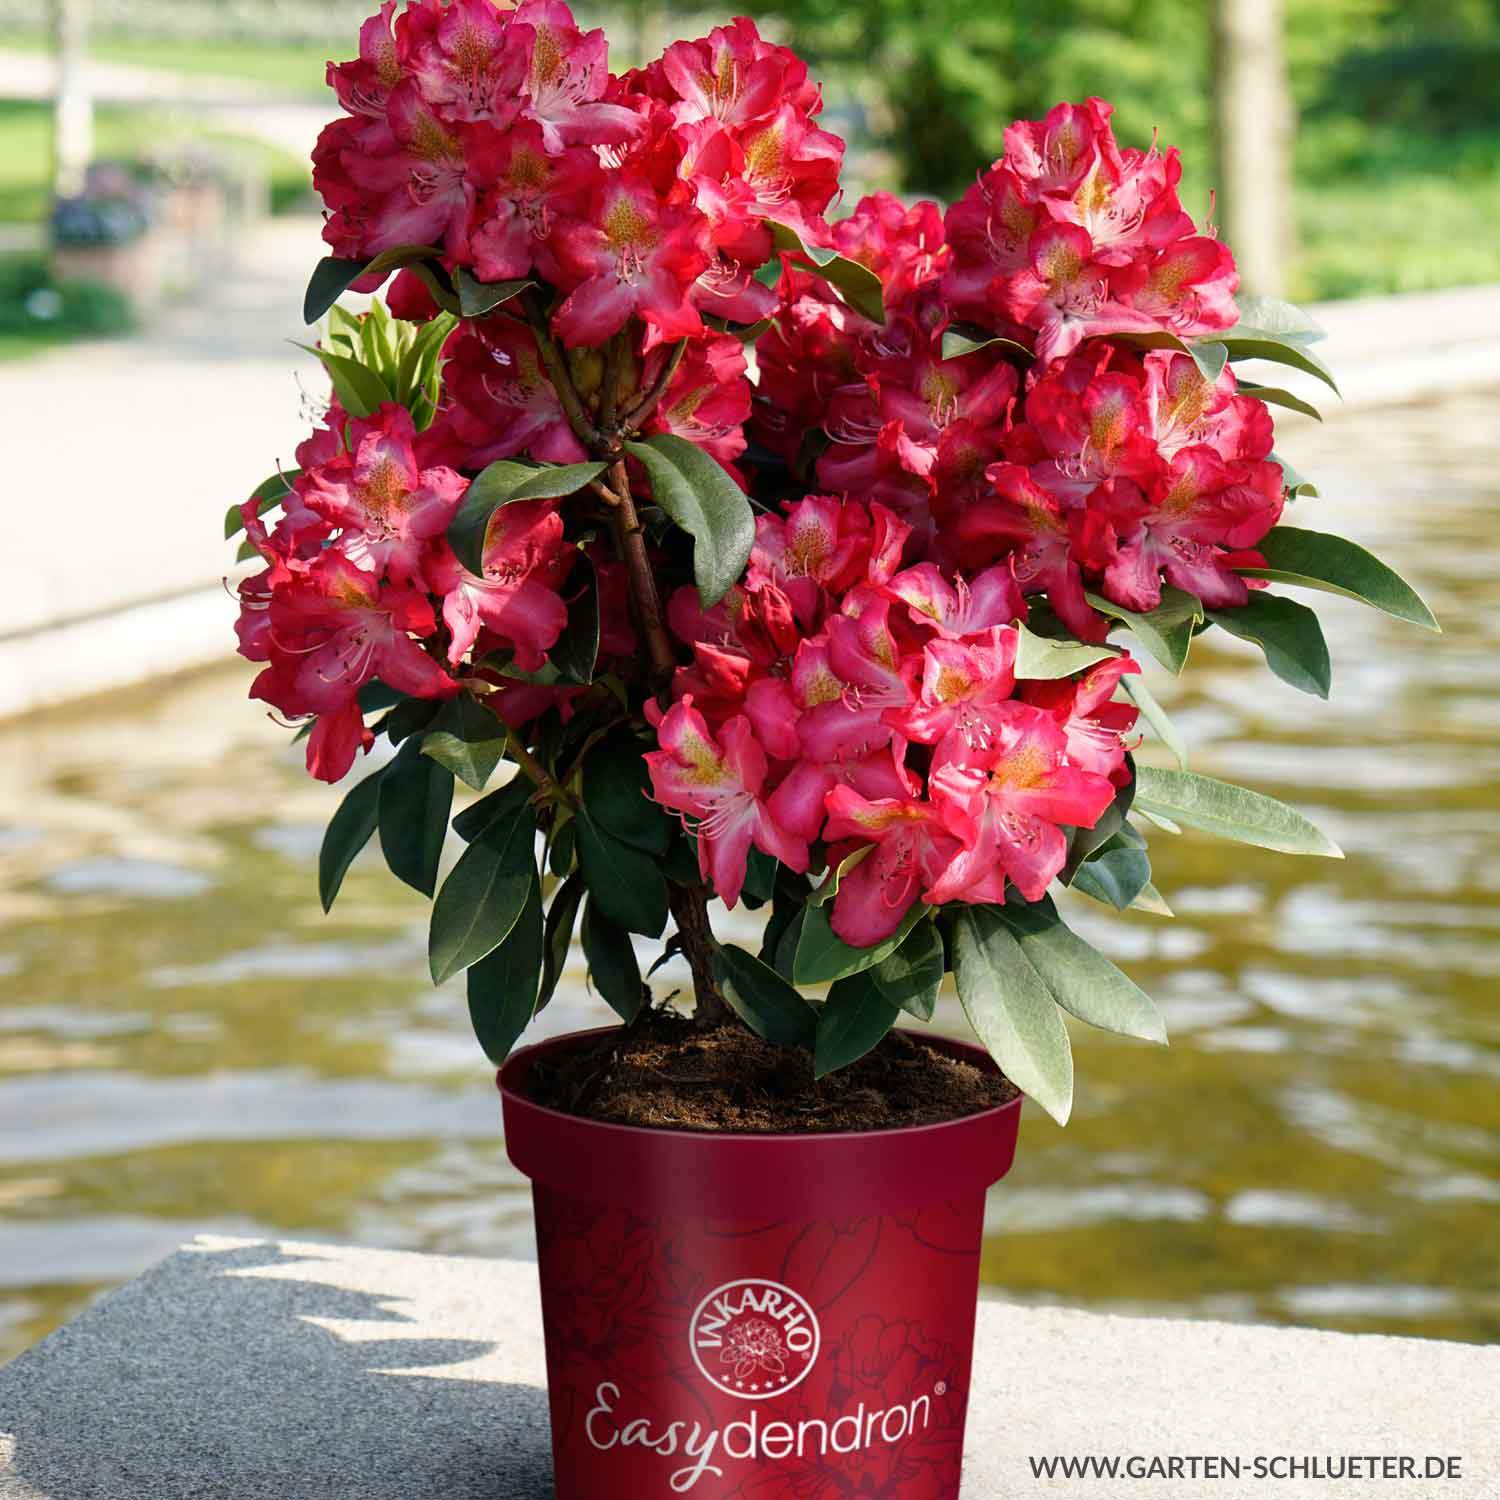 1 Rhododendron Junifeuer Easydendron Rhododendron hybride